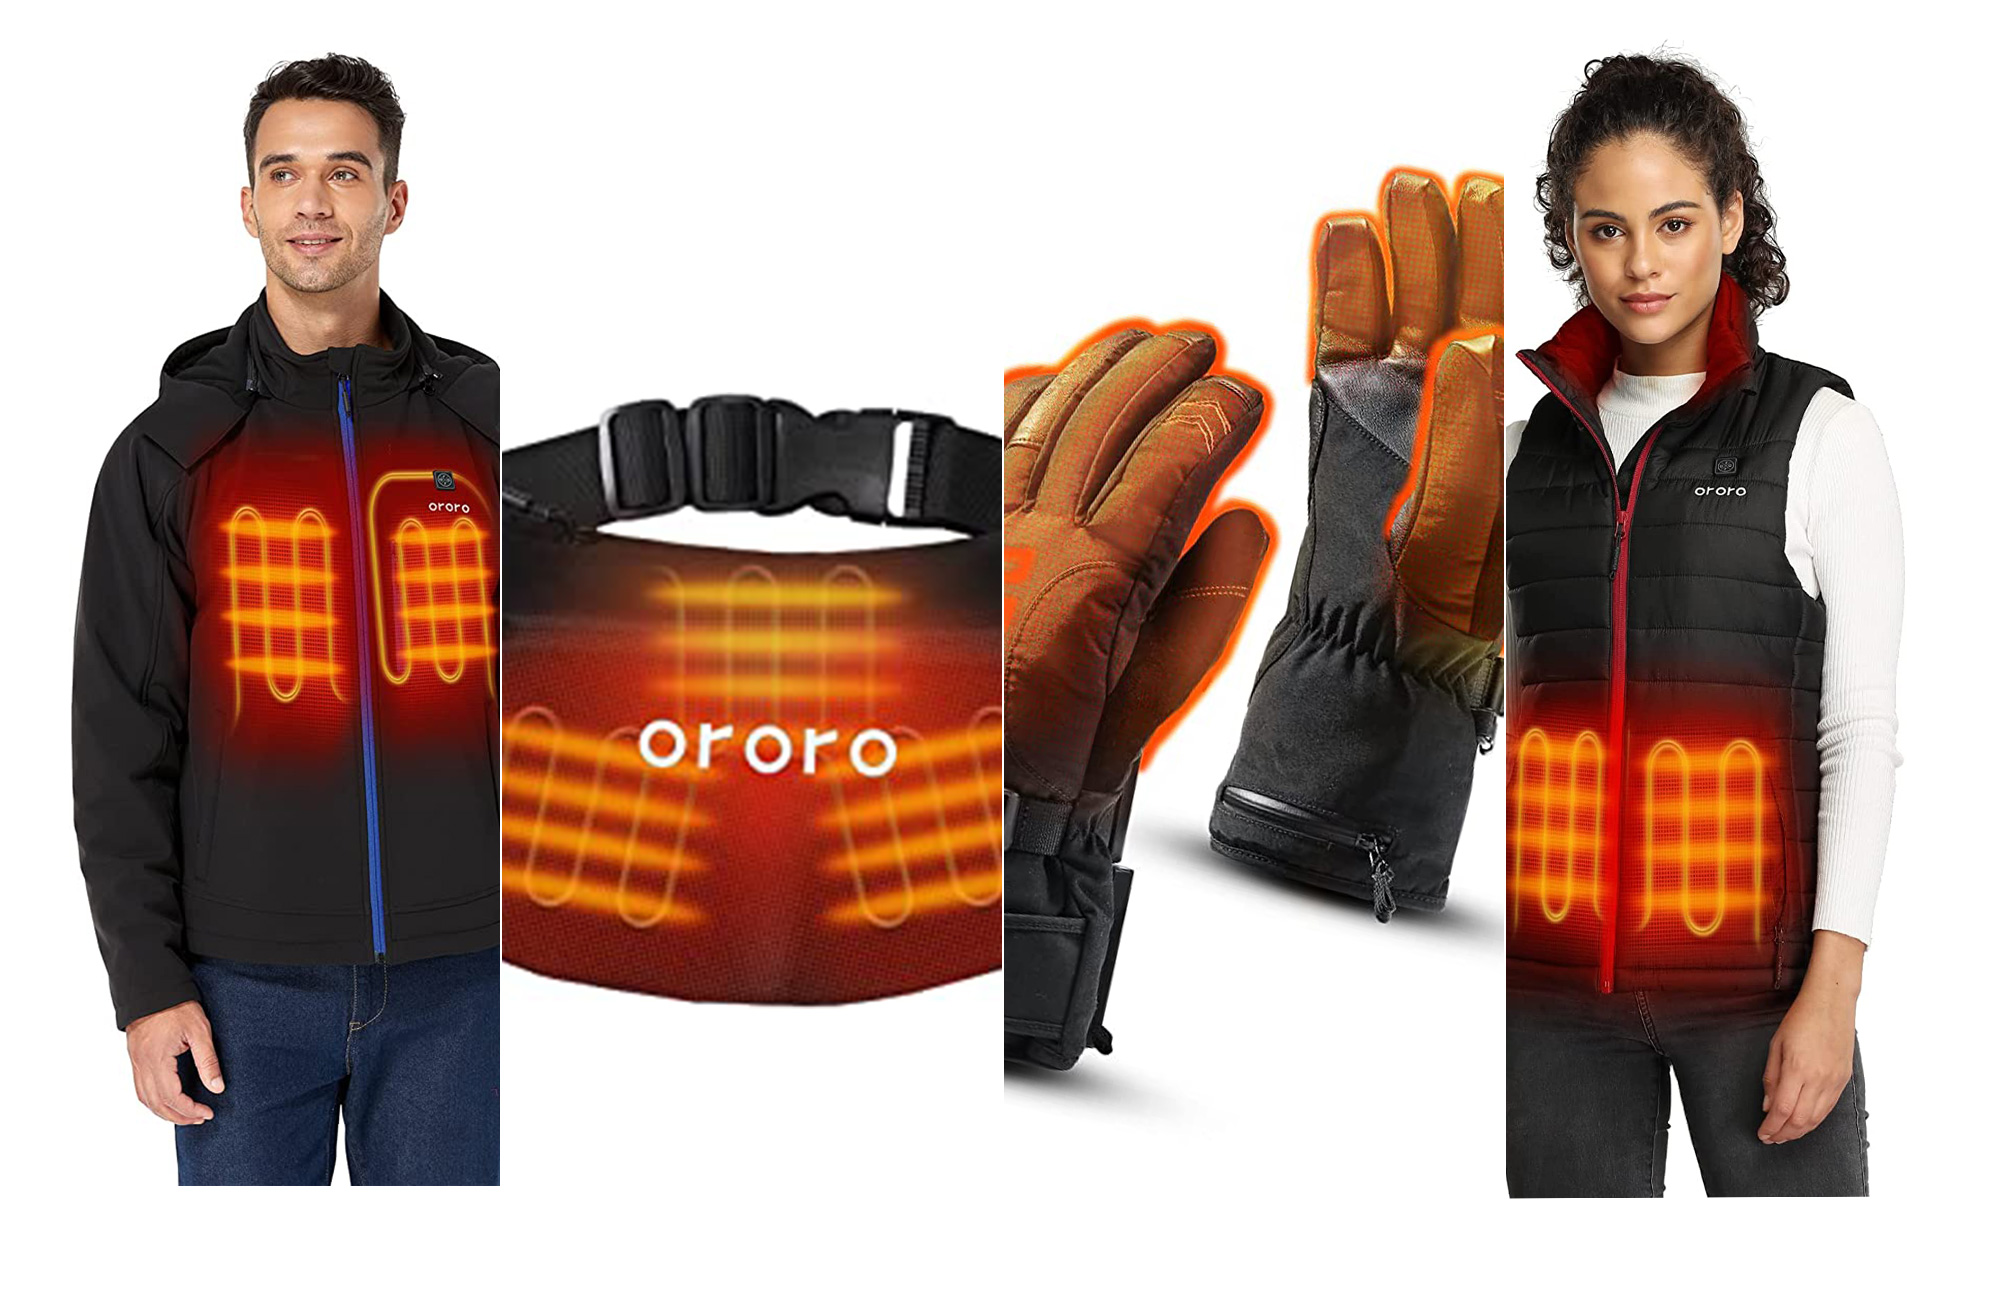 Warm up with these heated glove and vest Black Friday deals